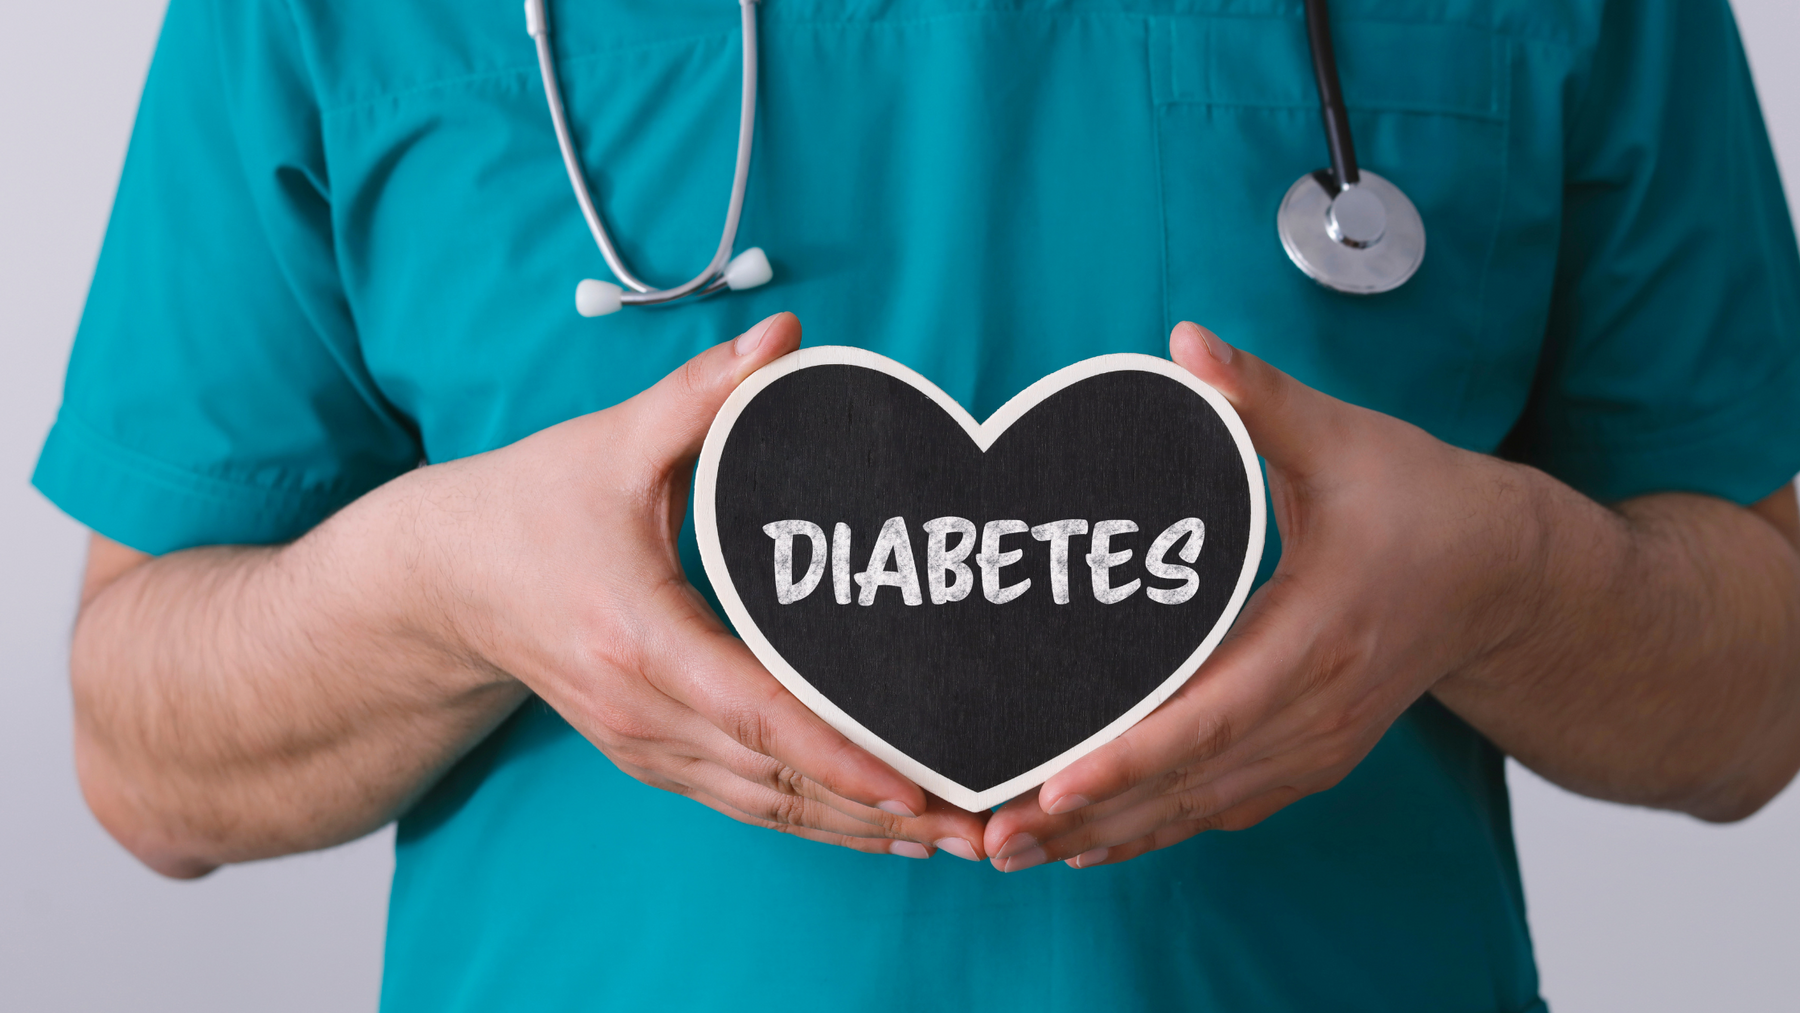 Diabetes: The Surprising Facts You Need to Know